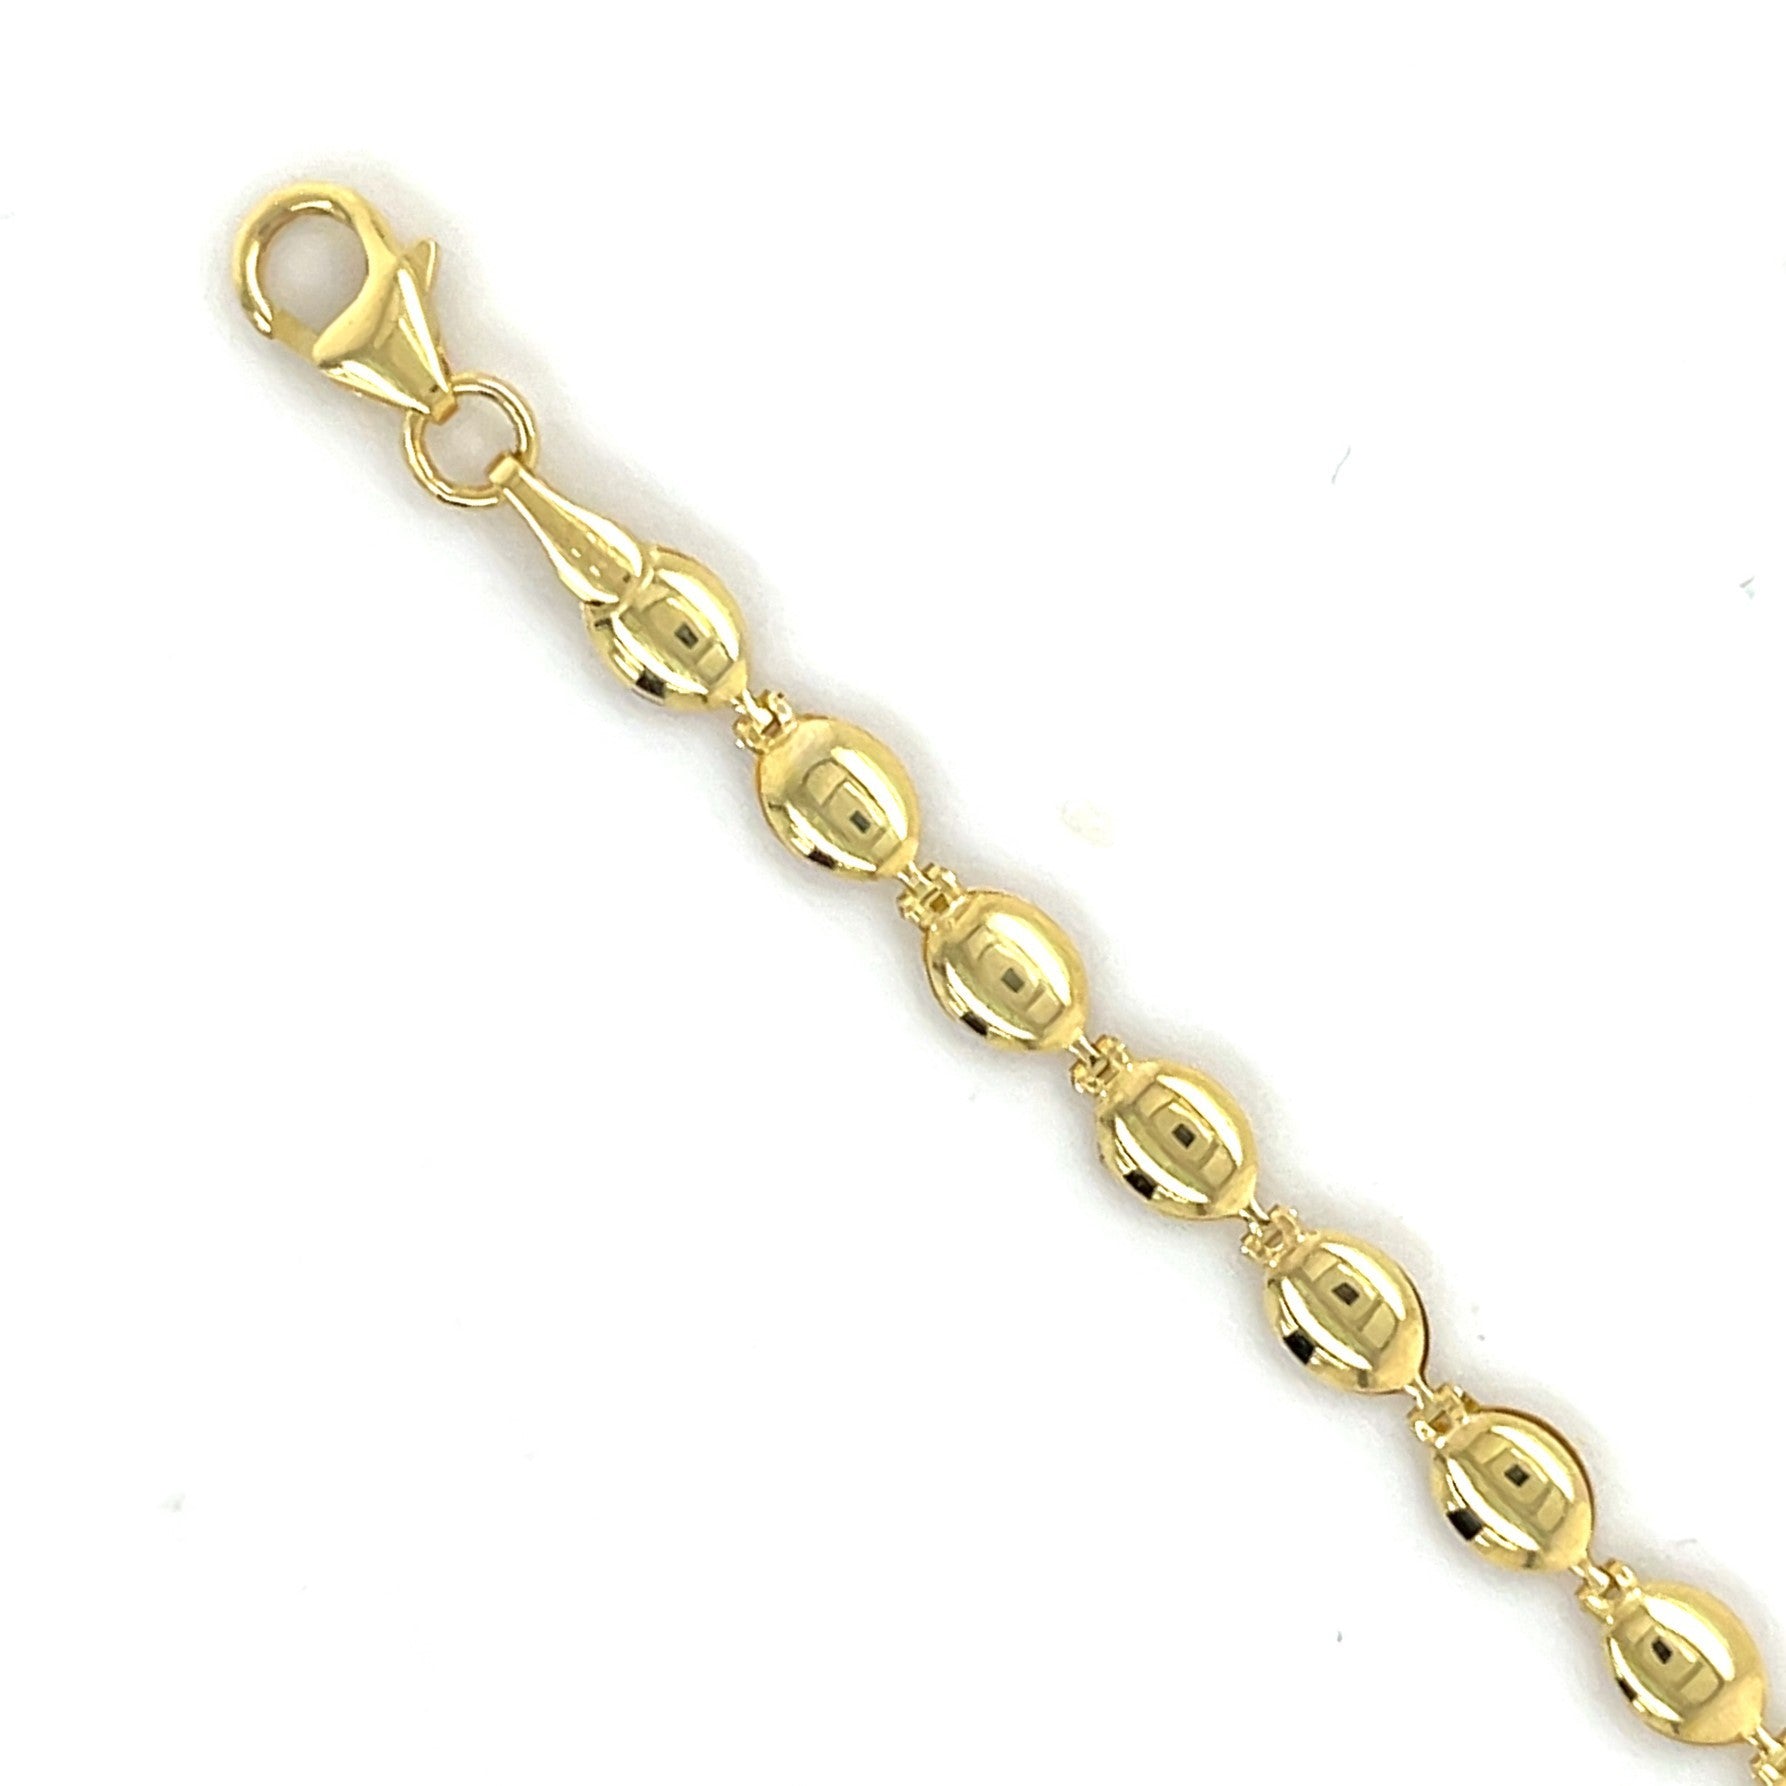 14k Gold Pebble Bead Necklace Chain